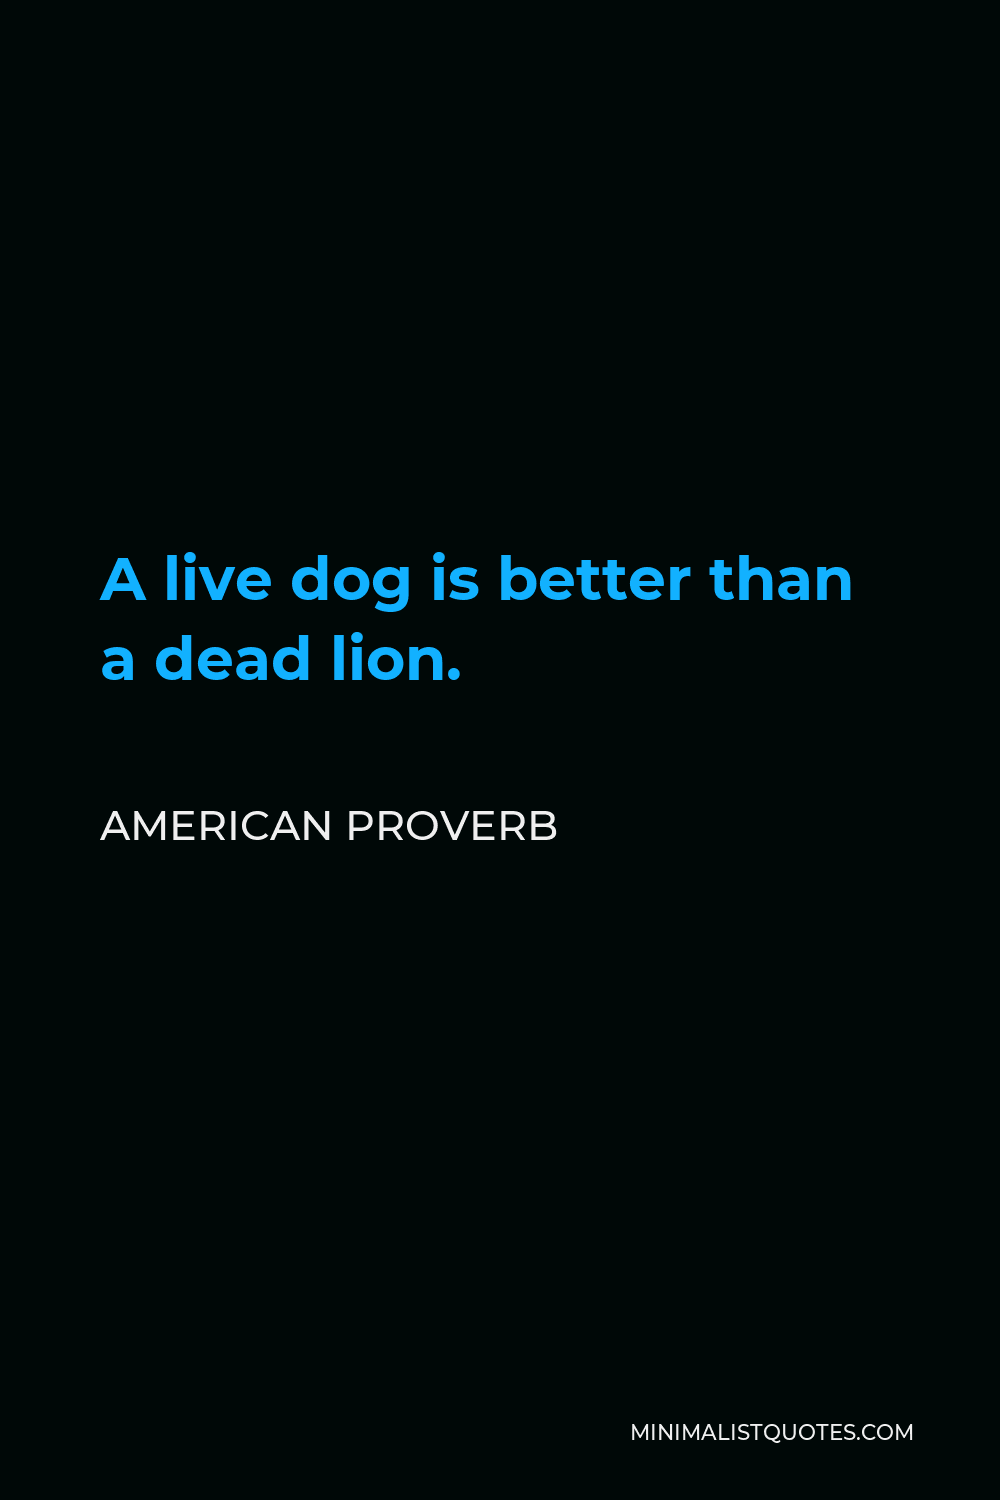 American Proverb Quote - A live dog is better than a dead lion.